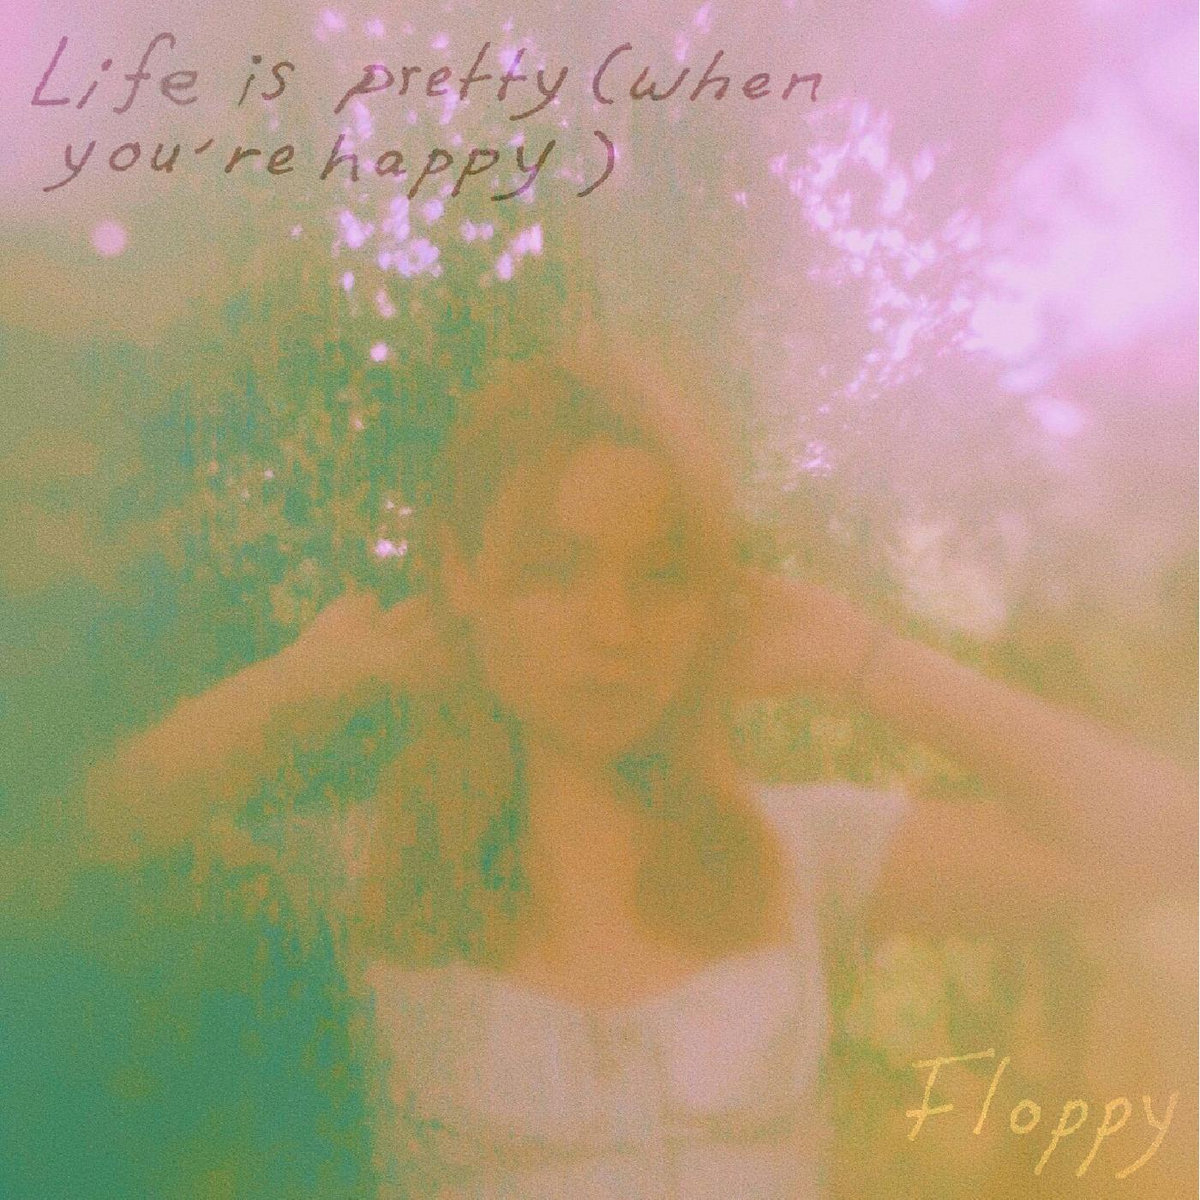 Single: Floppy – Life is pretty (when you’re happy)